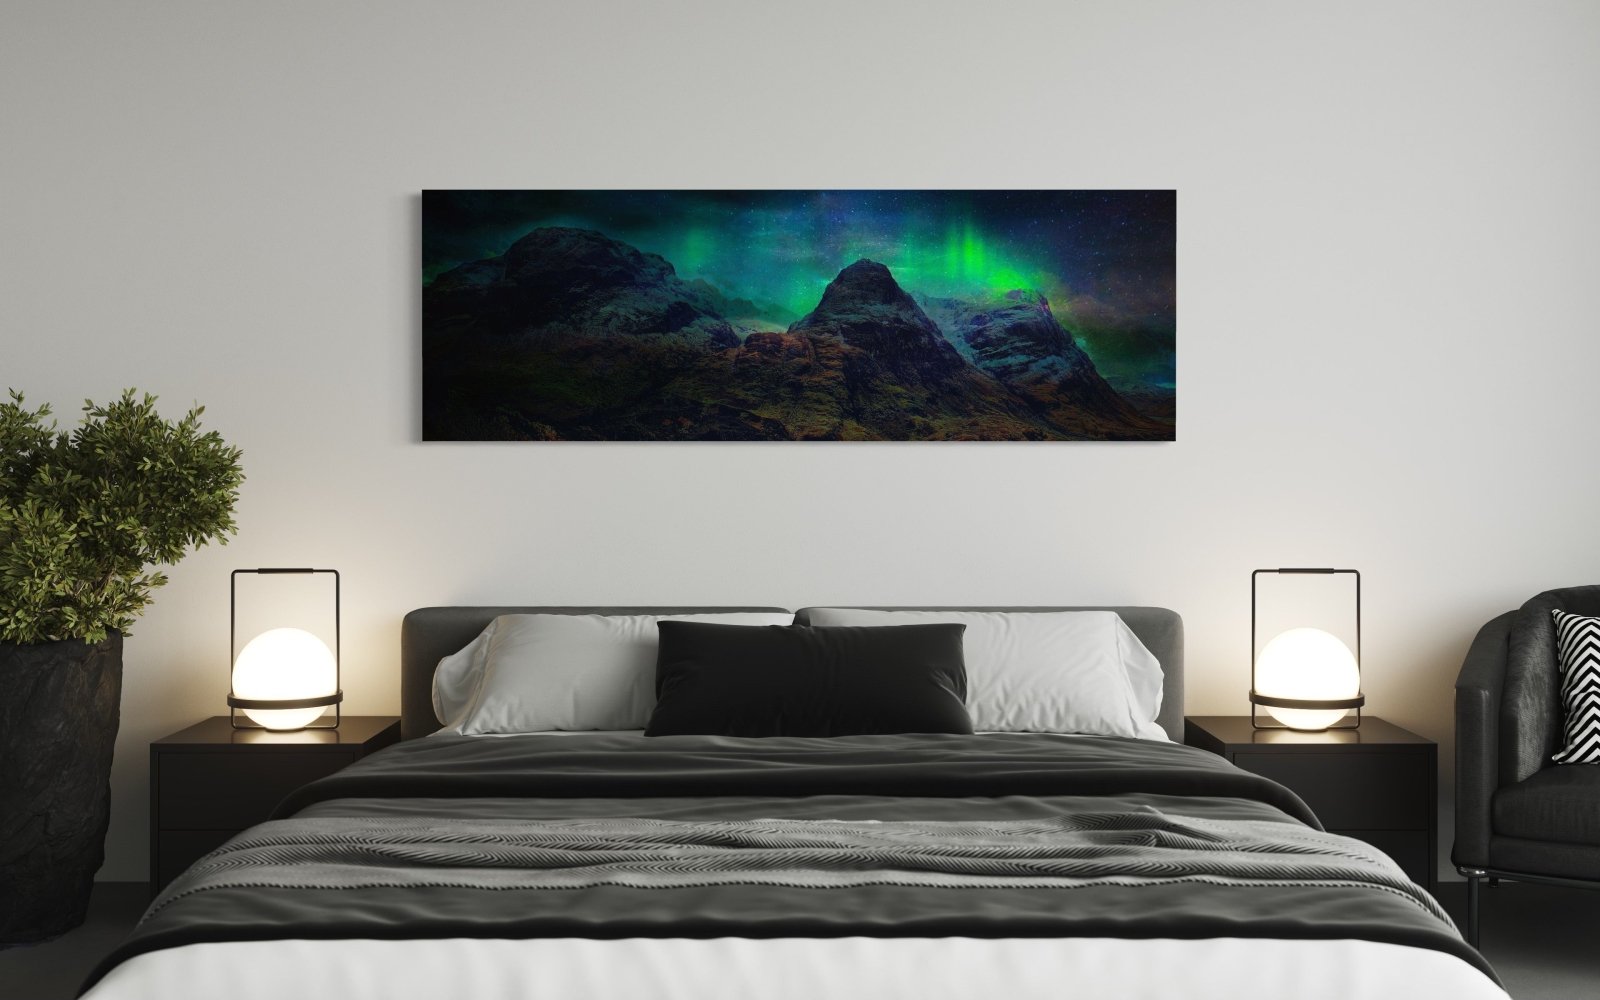 Glencoe Northern Lights Panoramic 72x24 inch Stretched Canvas Statement Wall Art-Statement Wall Art-Glencoe Art Gallery-Paintings, Prints, Homeware, Art Gifts From Scotland By Scottish Artist Kevin Hunter